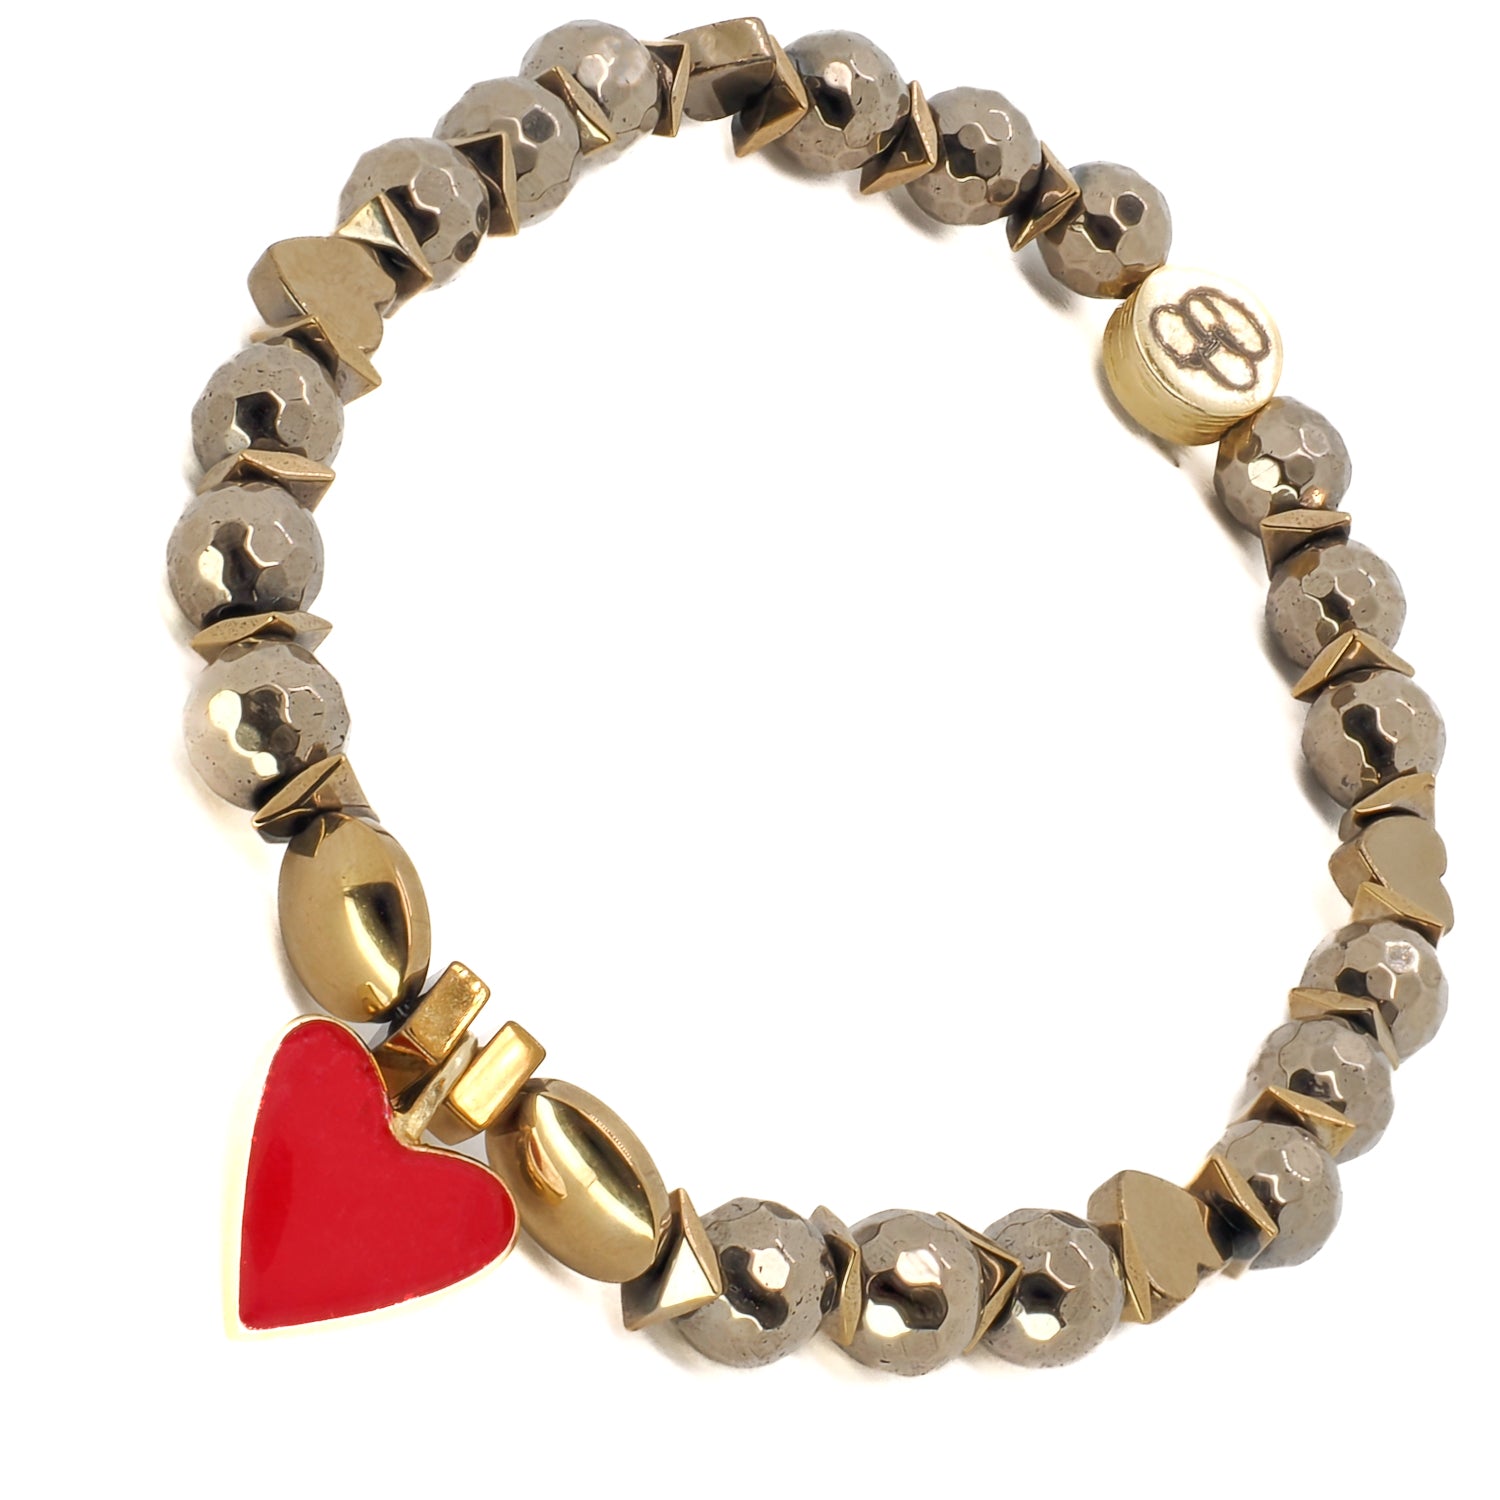 Discover the beauty and symbolism of the Red Heart Love Bracelet, a handcrafted piece adorned with a gold-plated heart charm.